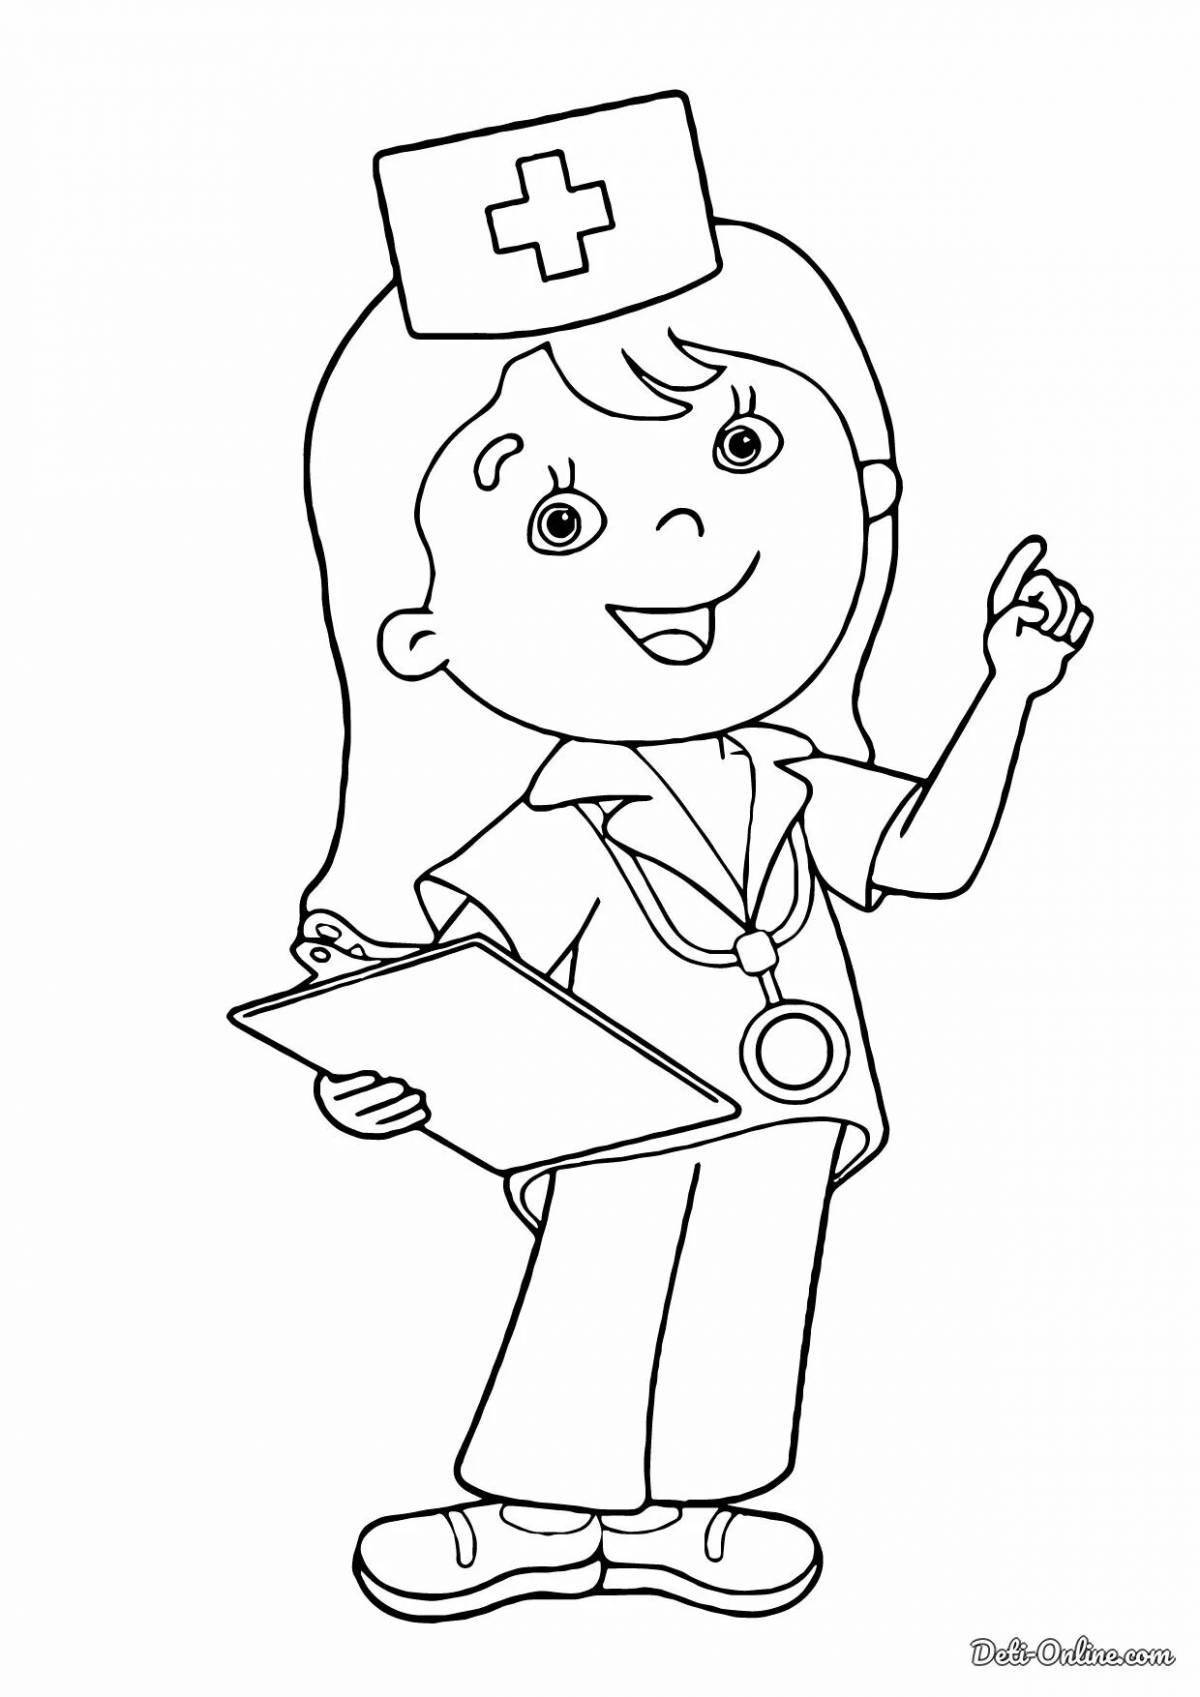 Surgeon coloring book for children